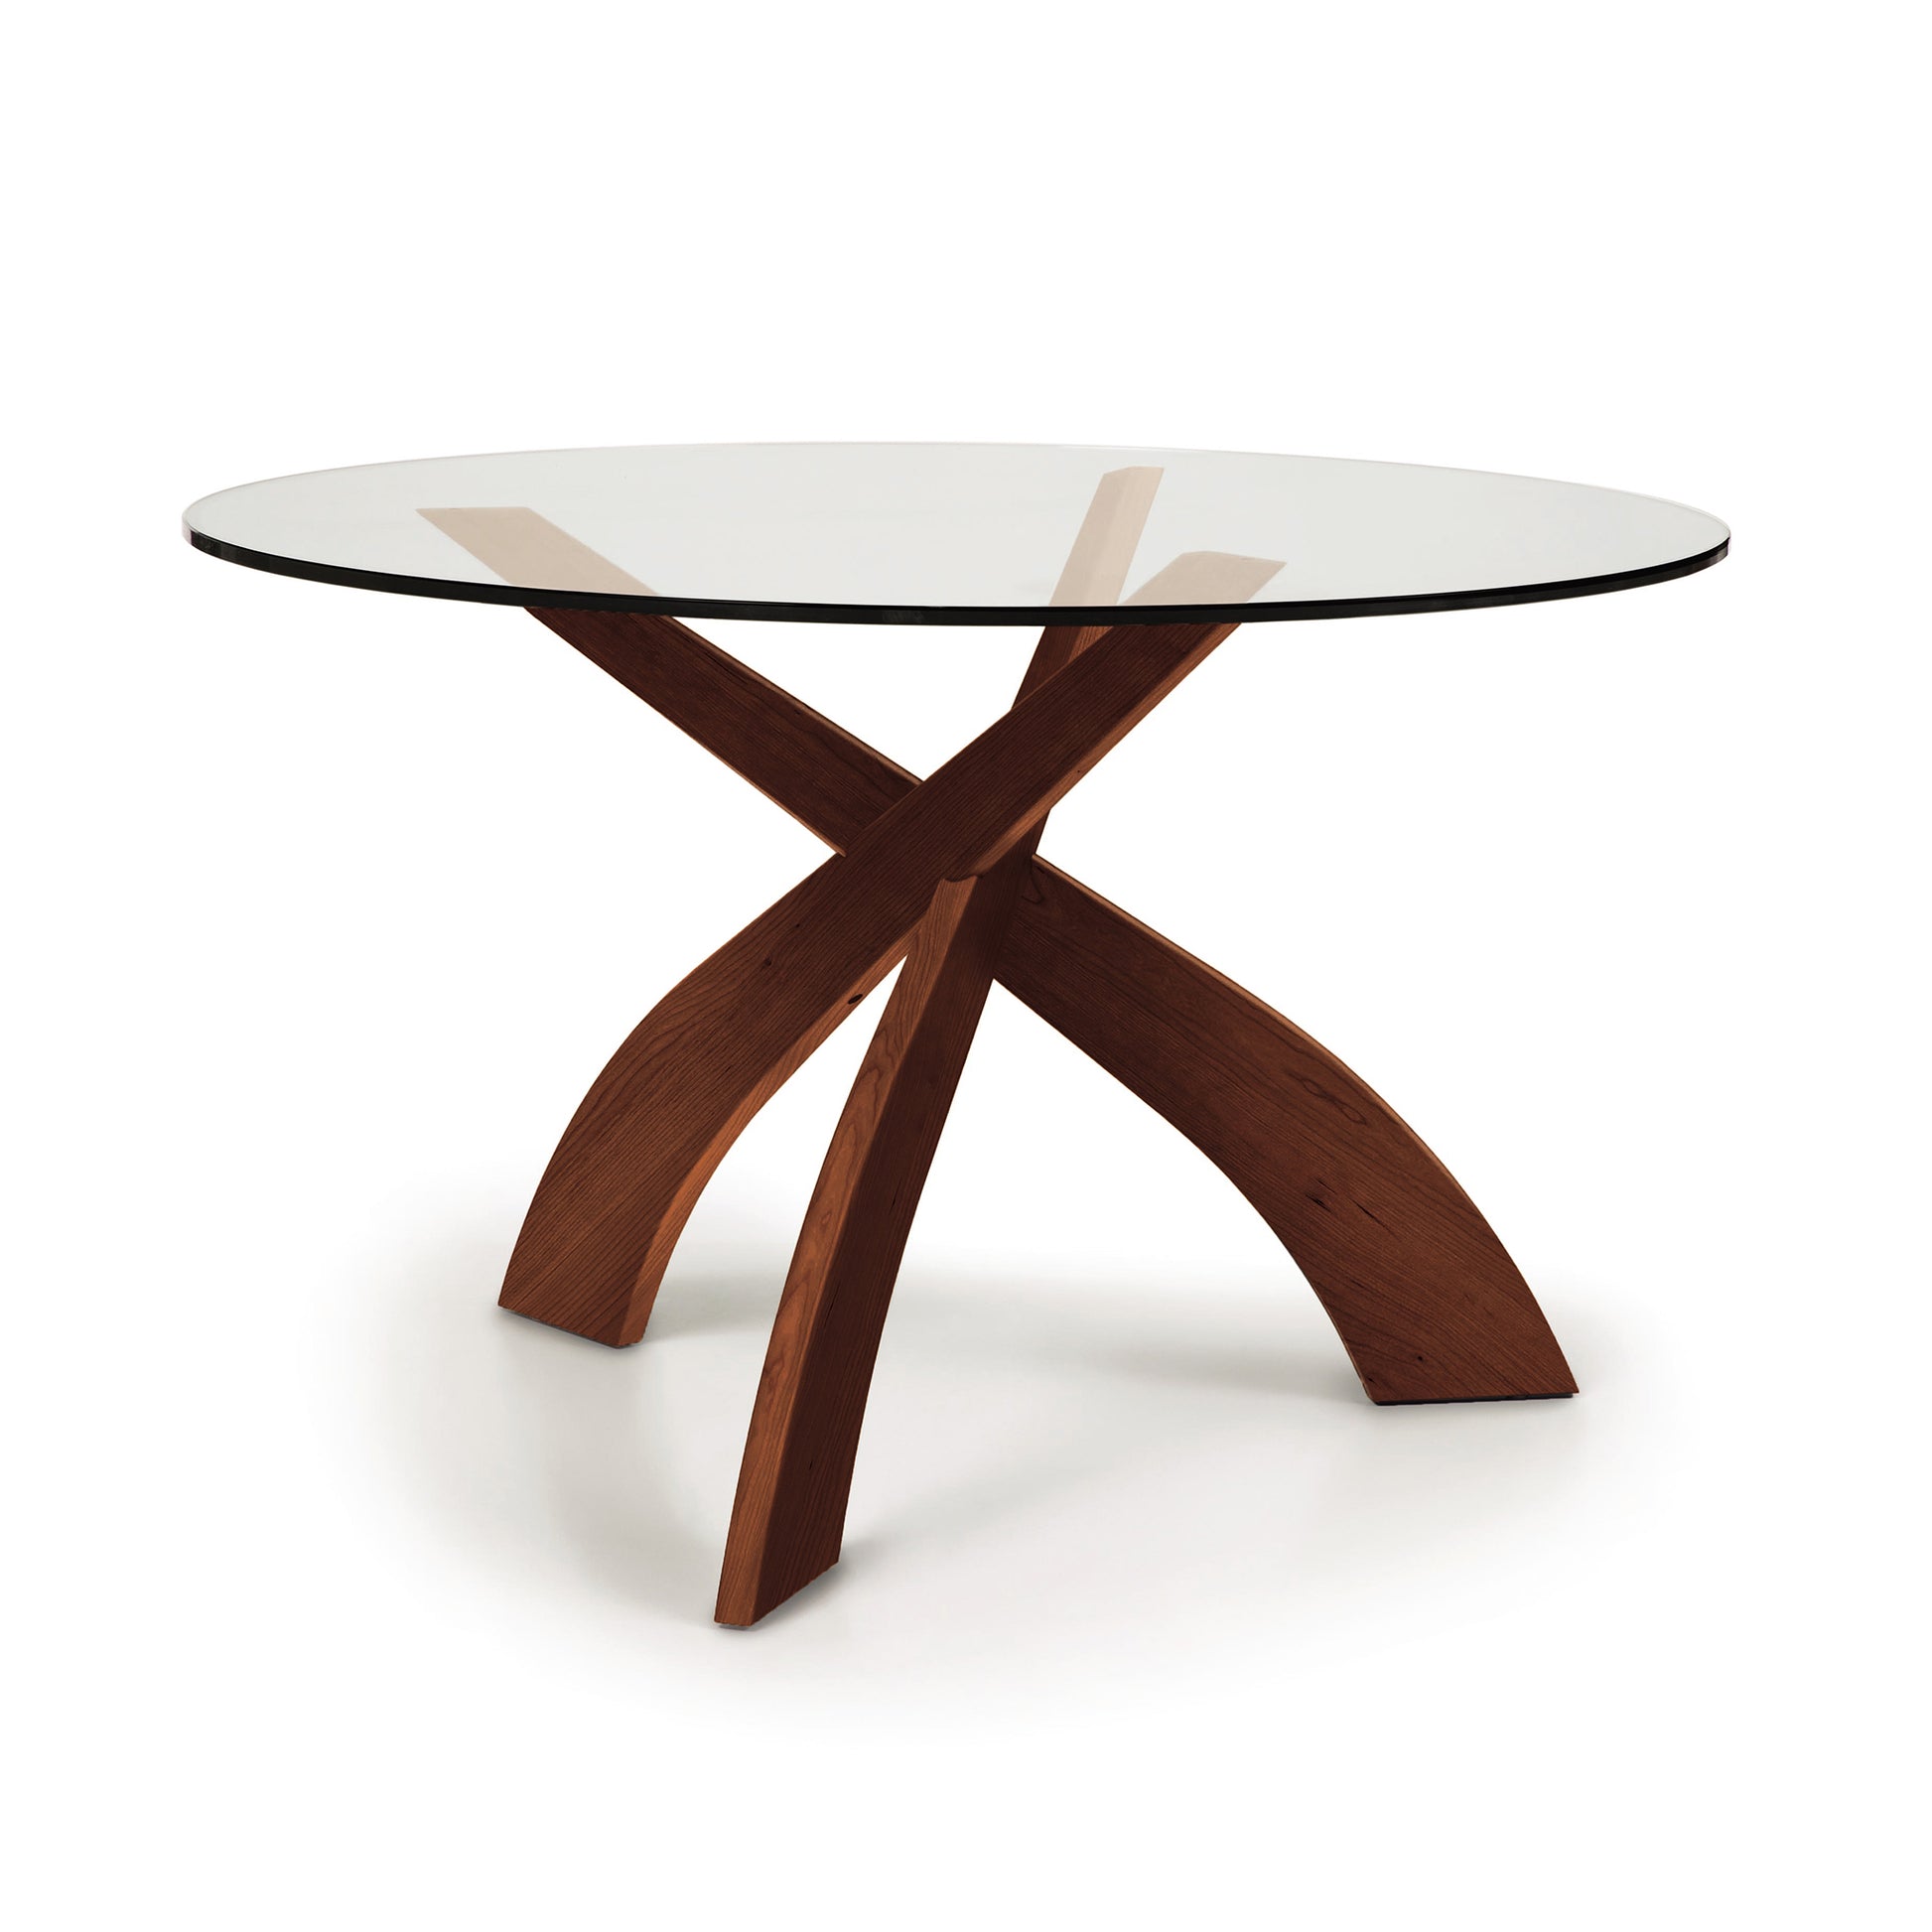 A modern Entwine Round Glass Top Dining Table with a wooden base consisting of interlocking legs crafted from sustainably sourced cherry wood on a white background. (Brand: Copeland Furniture)